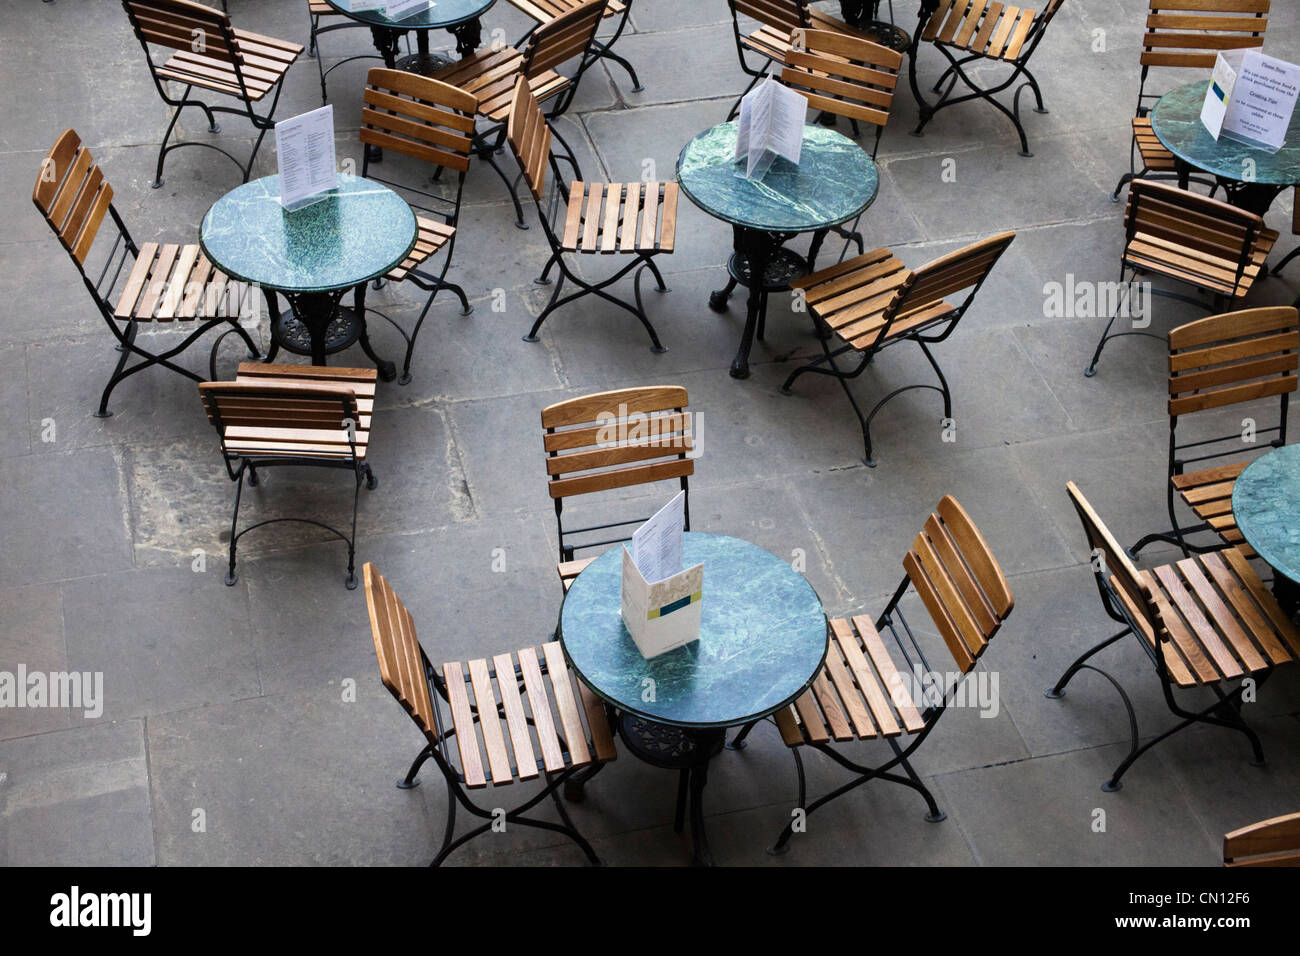 Empty tables at a cafe, London, UK Stock Photo